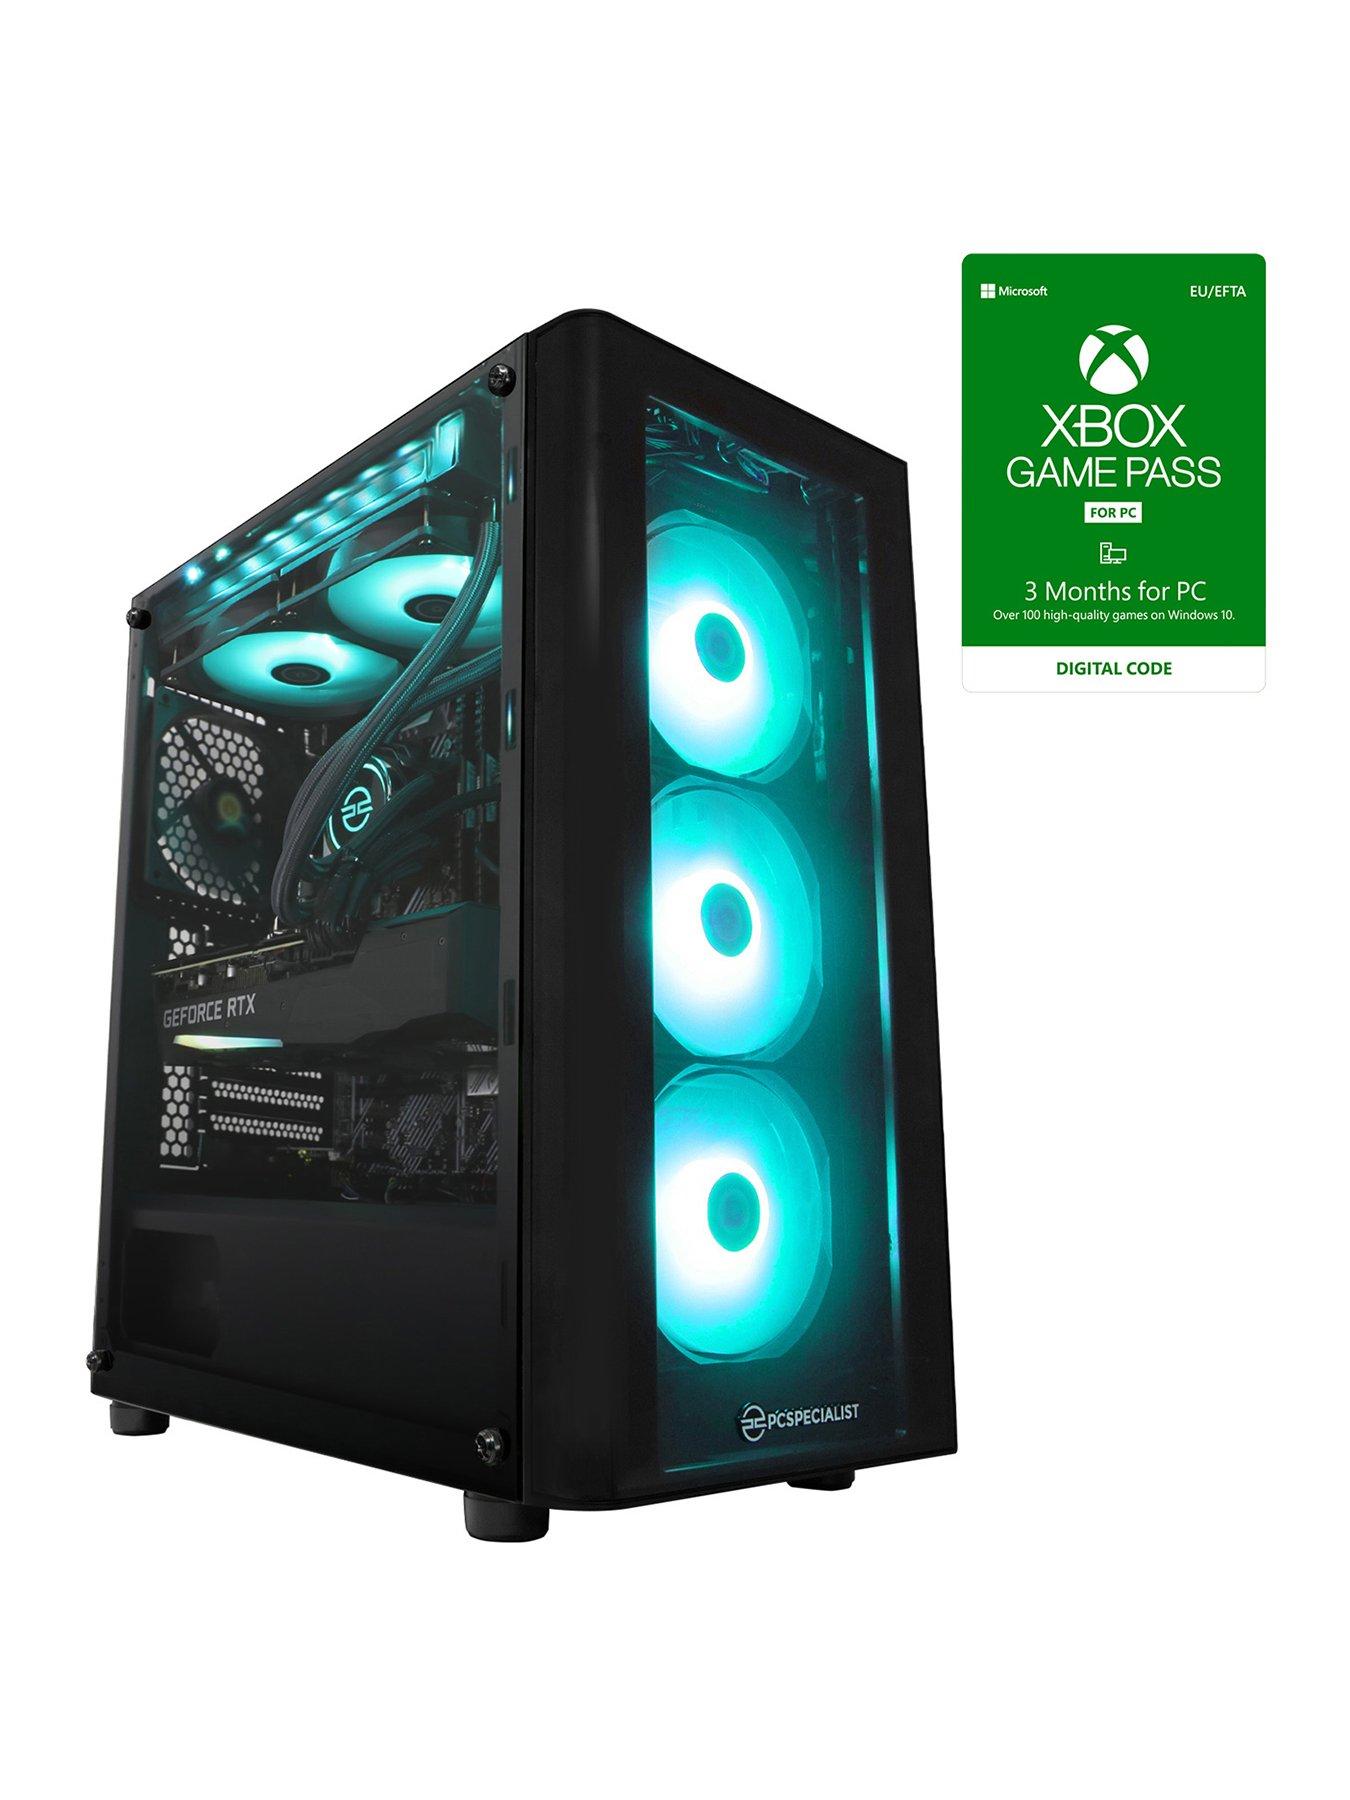 Pc Specialist Cypher Srt Gaming Pc Geforce Rtx 3070 Intel Core I7 16gb Ram 512gb Ssd 3tb Hdd With 3 Month Xbox Game Pass For Pc Littlewoods Com